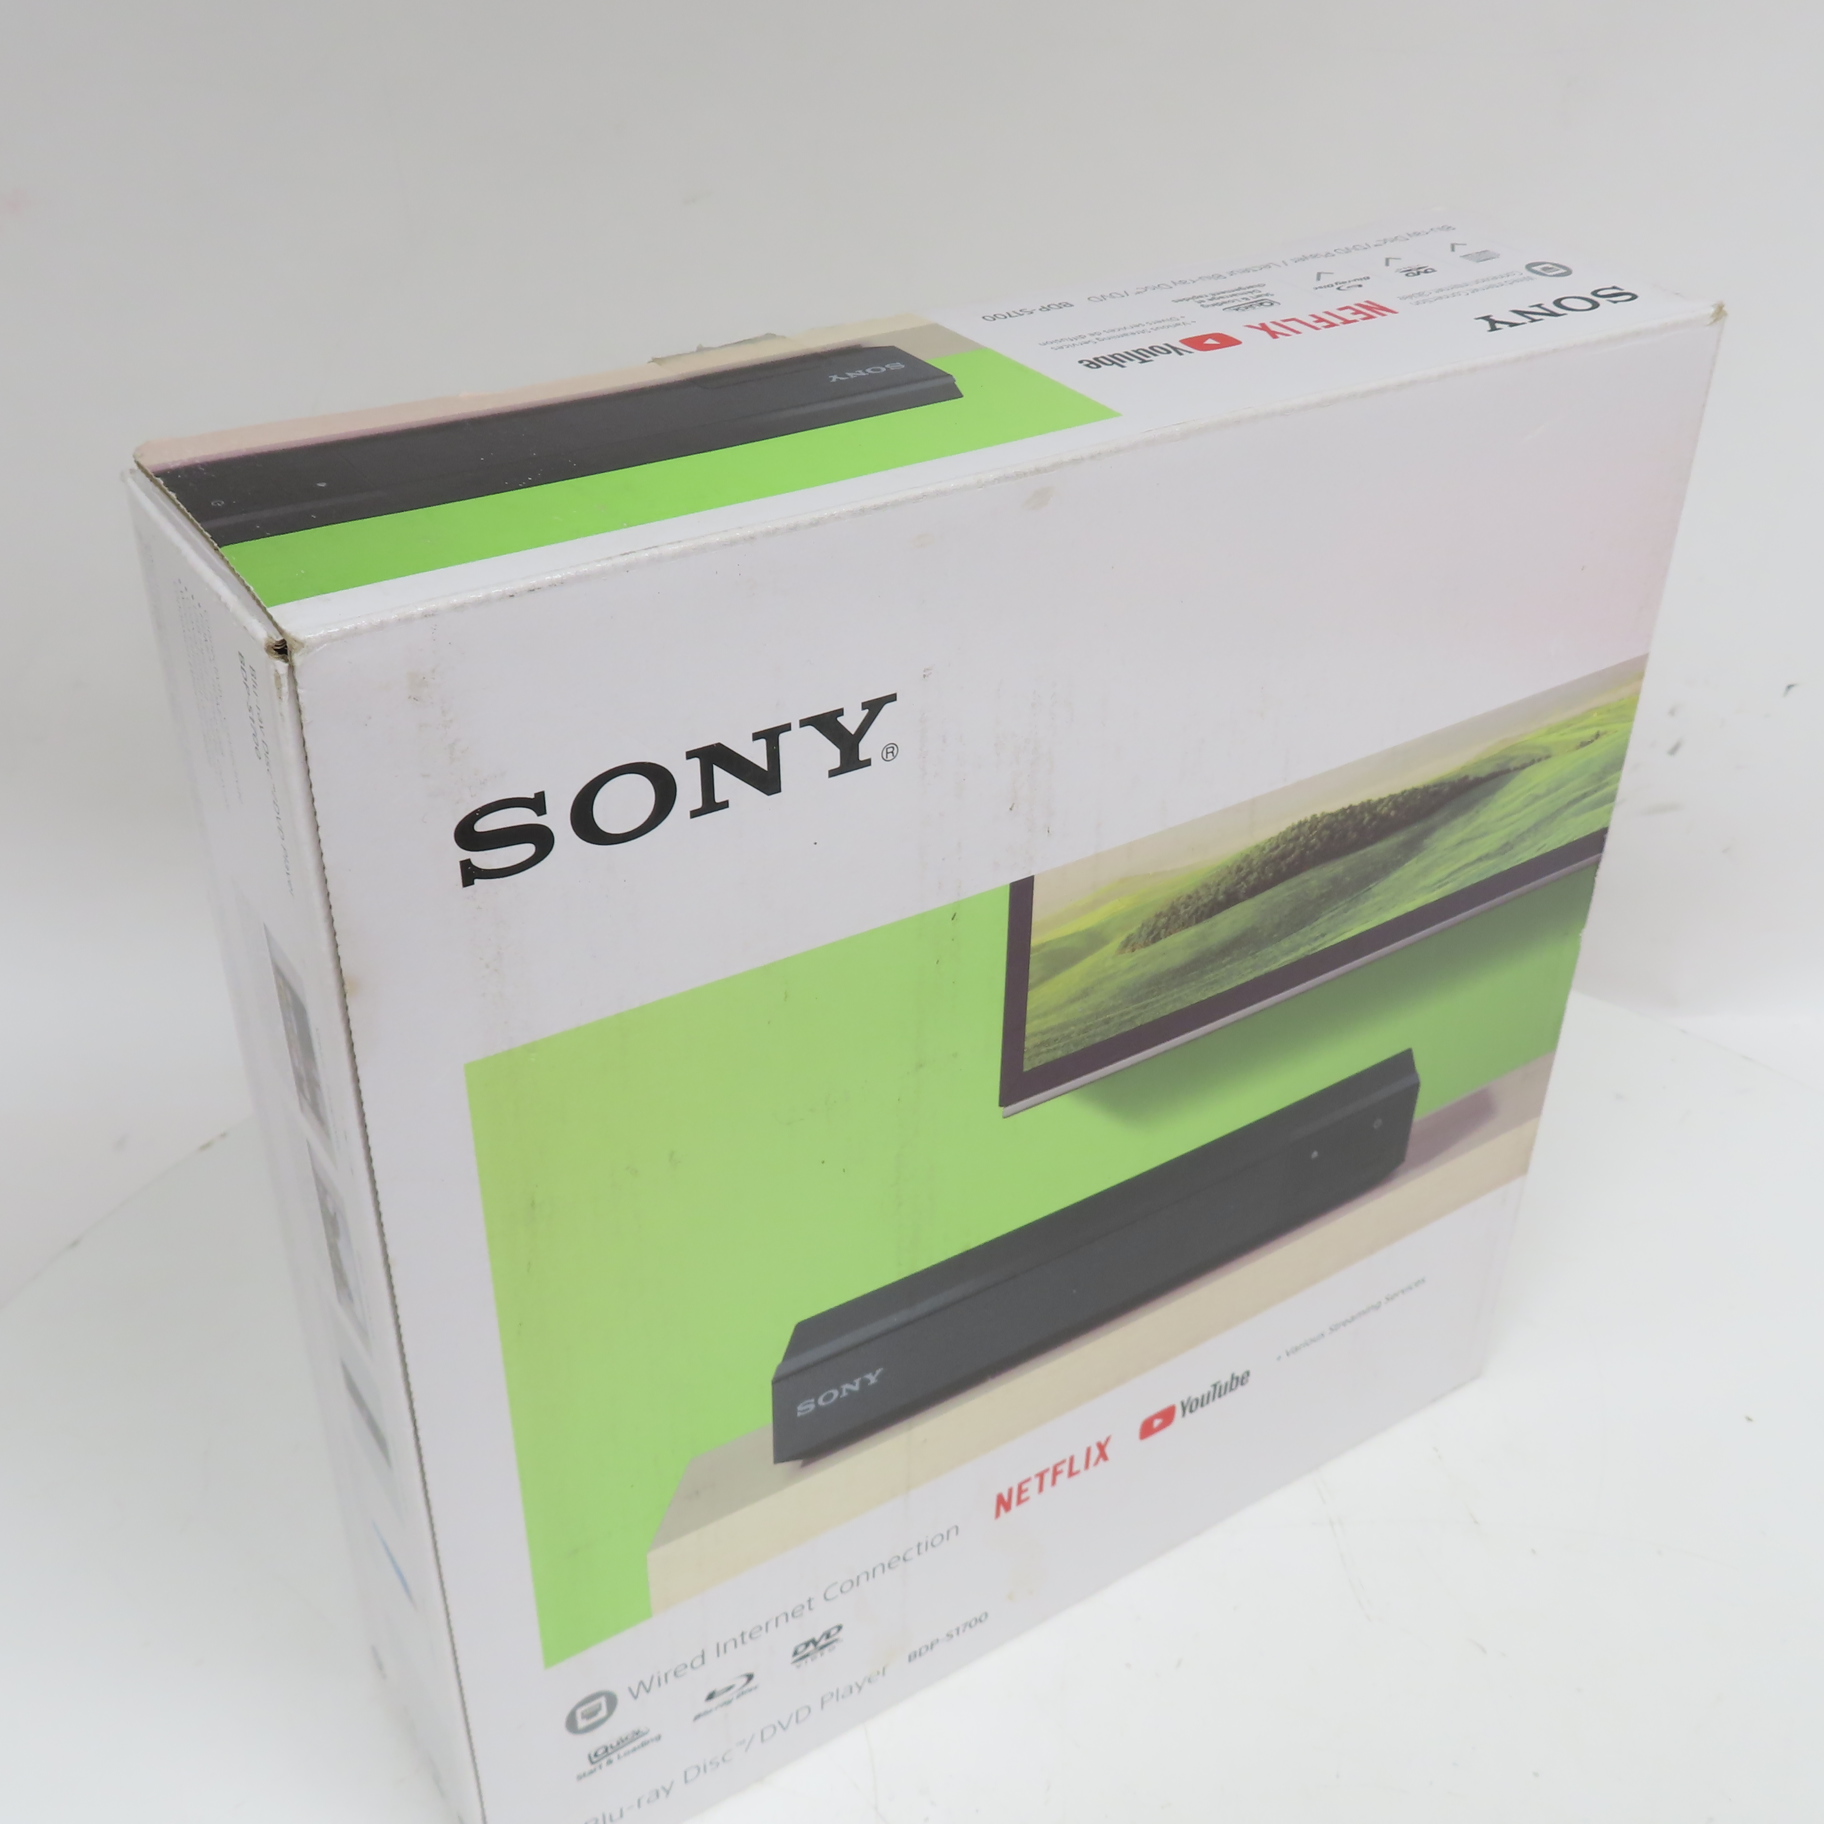 Wi-Fi Box) (In Sony Connected BDP-S1700 Player Blu-Ray/DVD